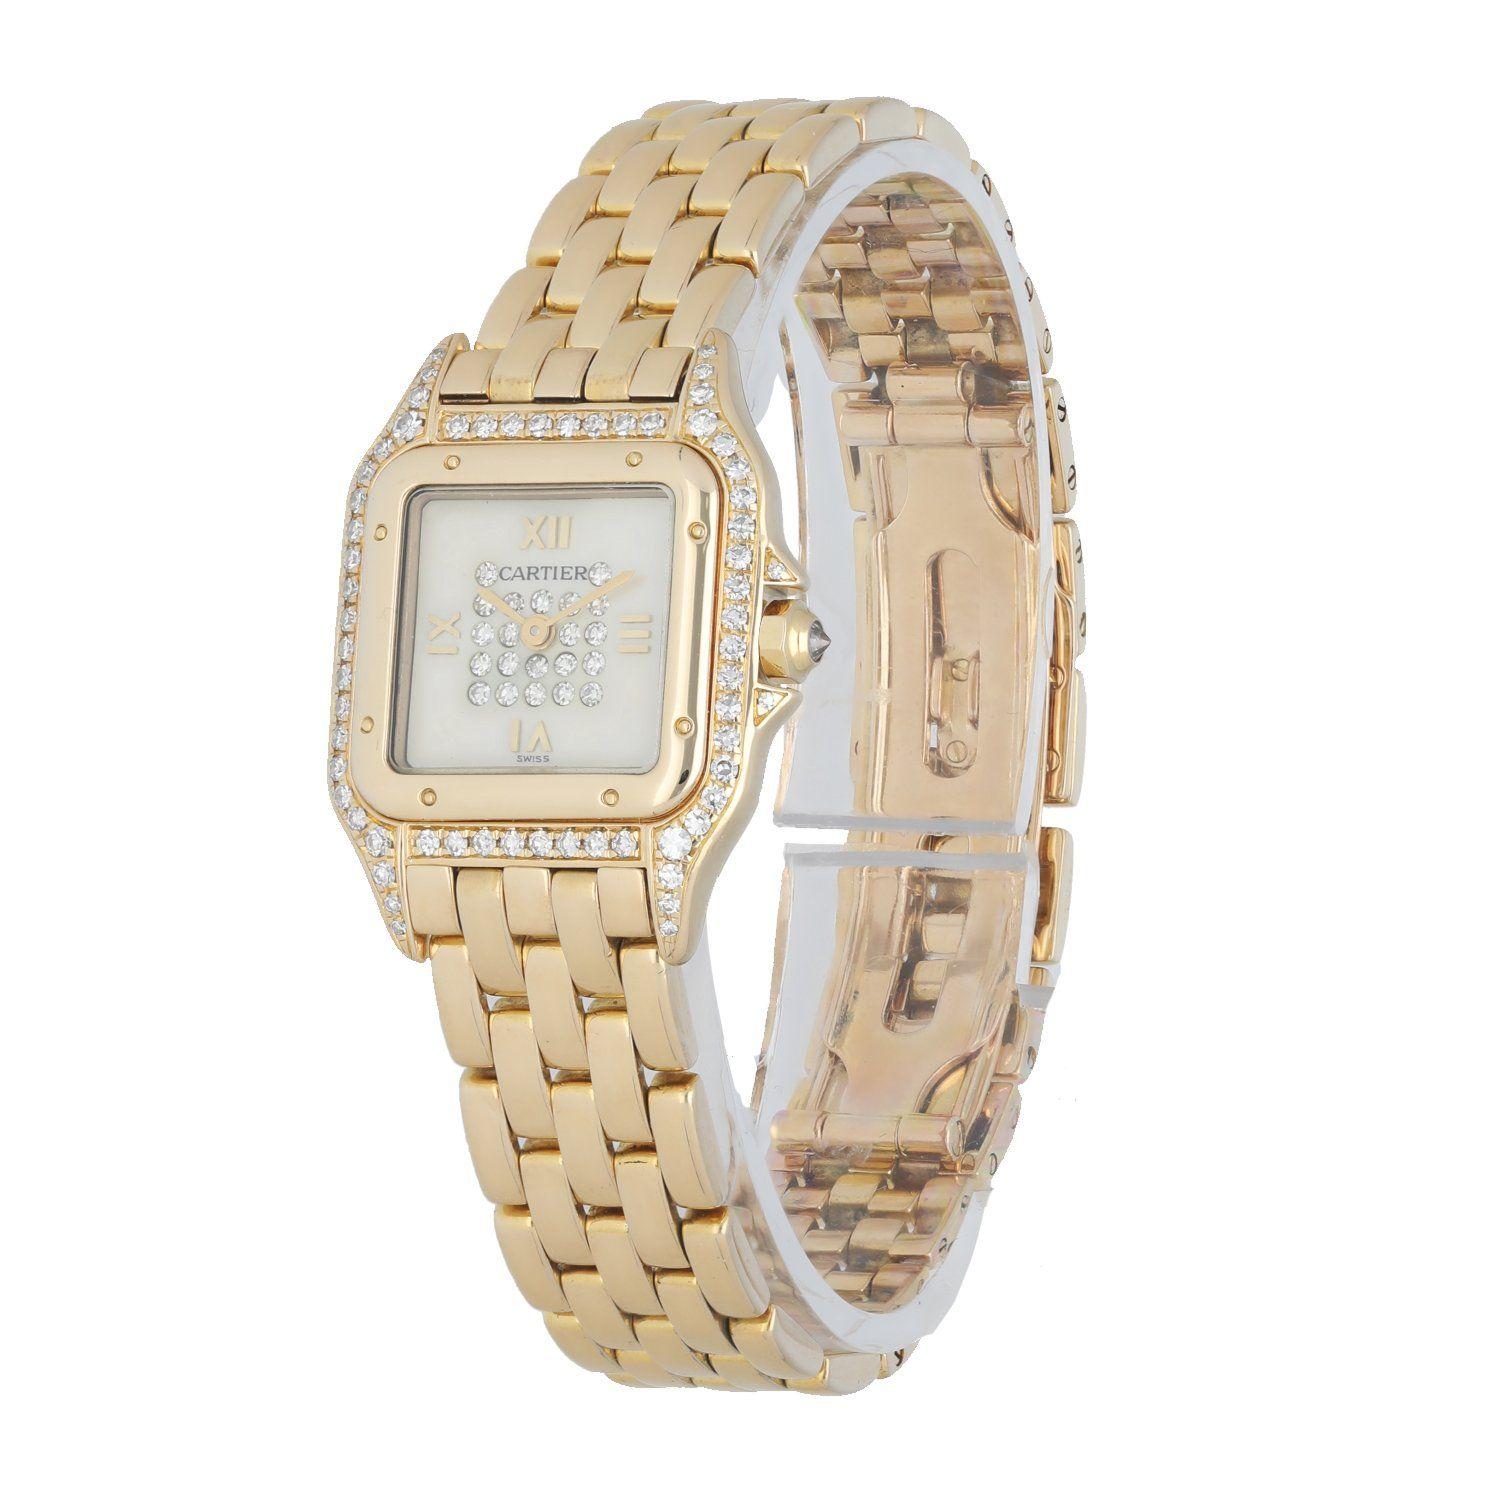 Cartier Panthere 8057915 18k Yellow Gold & Diamonds Ladies watch.Â 24mm 18k Yellow gold case. Yellow Gold Stationary bezel with factory set diamonds. Mother of pearl diamond dial.Â 18KÂ Yellow Gold Bracelet with hidden Butterfly Clasp. Will fit up